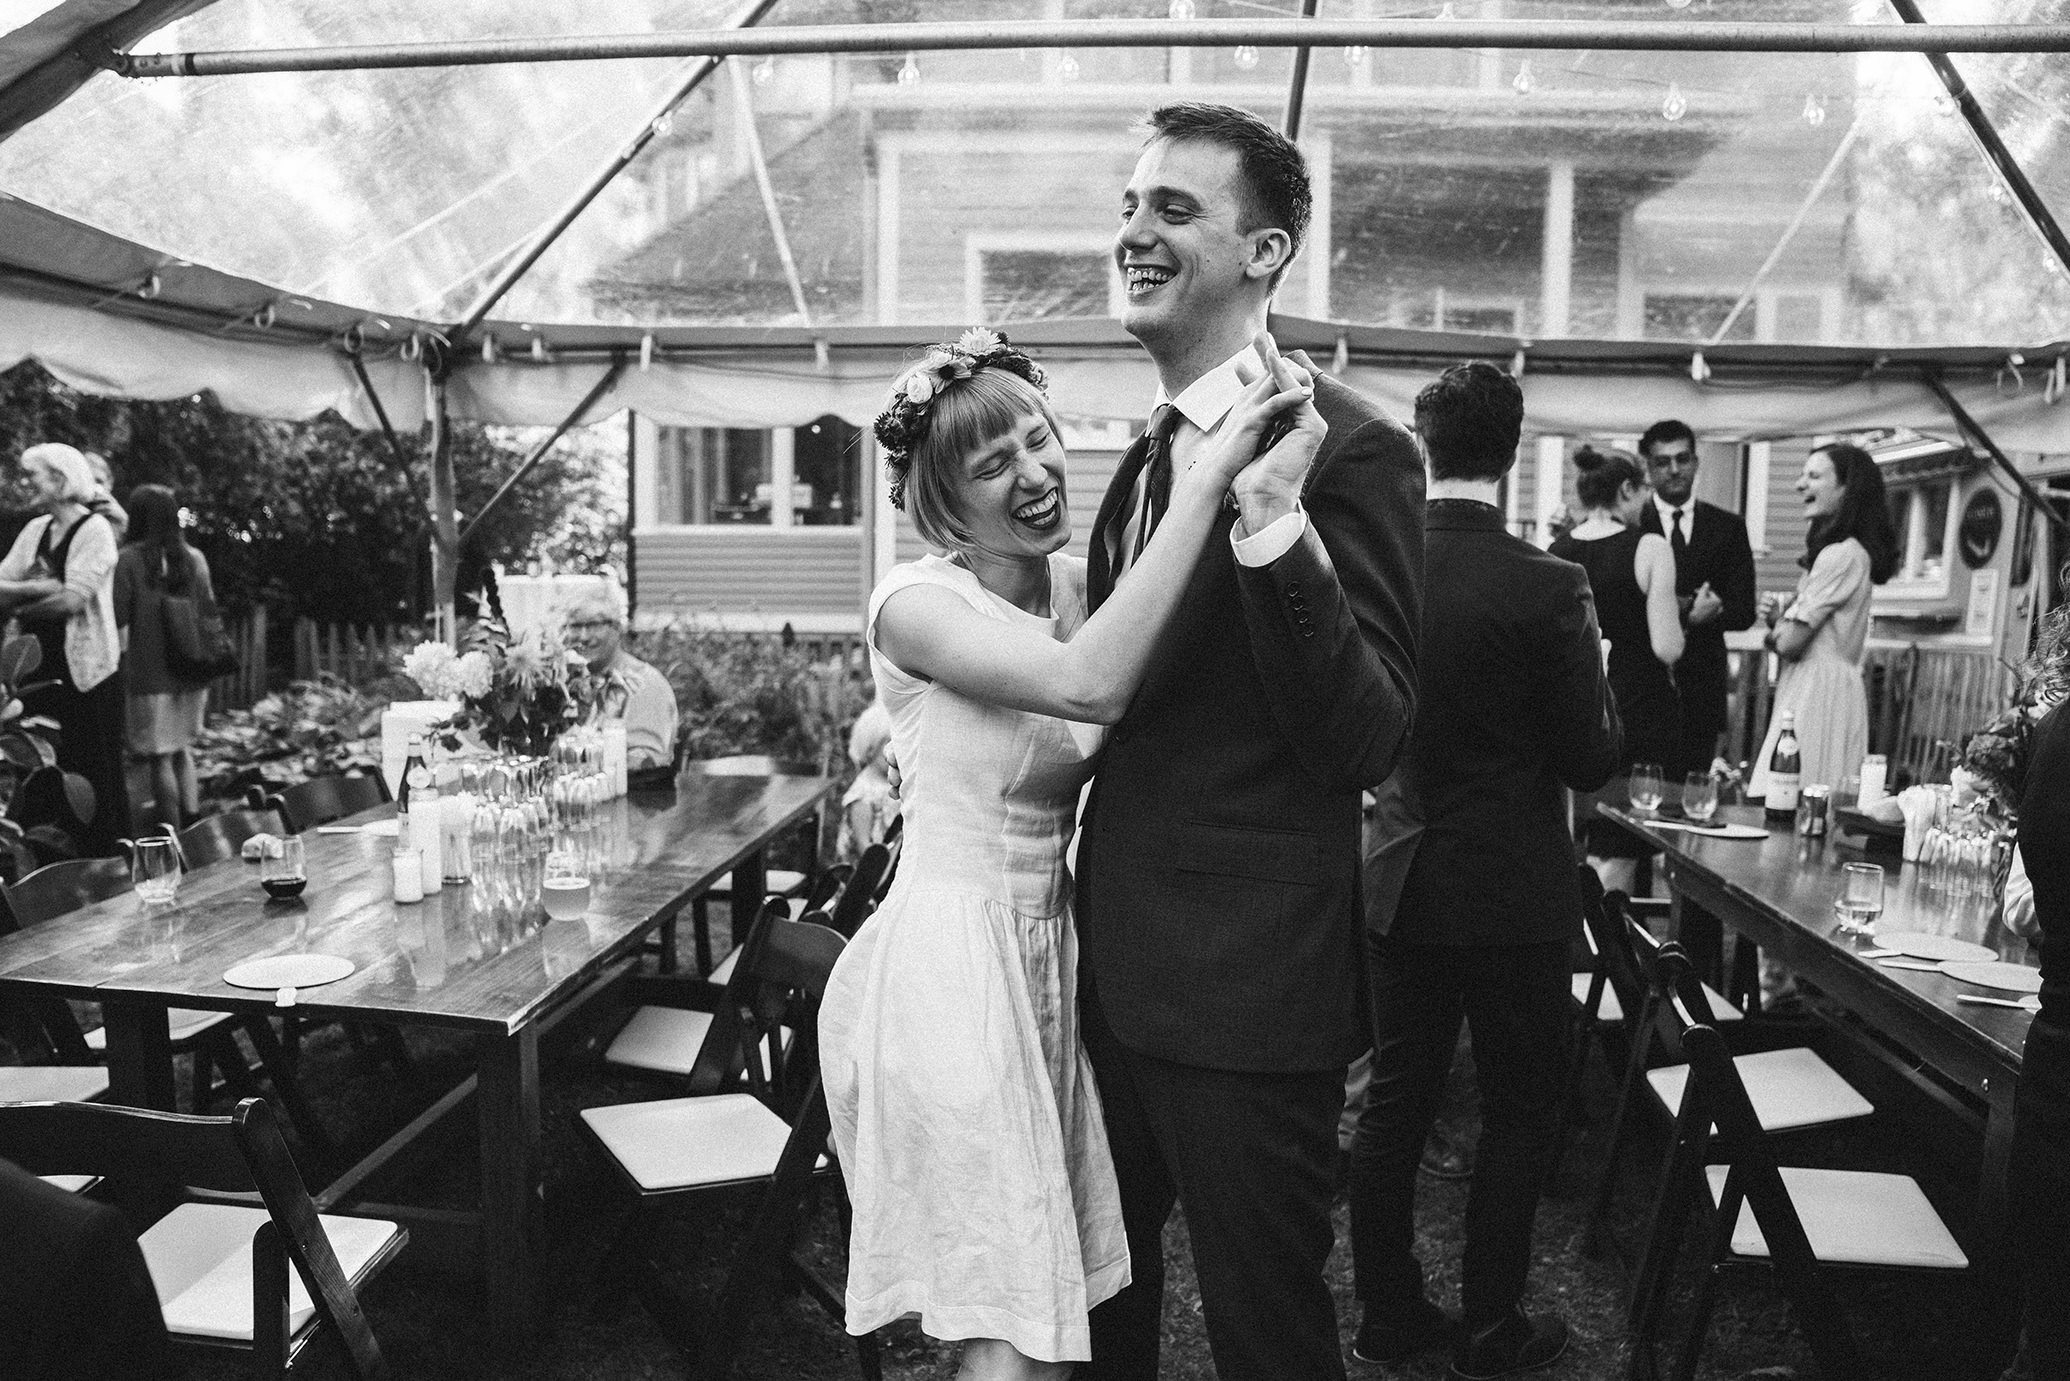 A documentary photograph featured in the best of wedding photography of 2019 showing a couple sharing their first dance during their backyard wedding